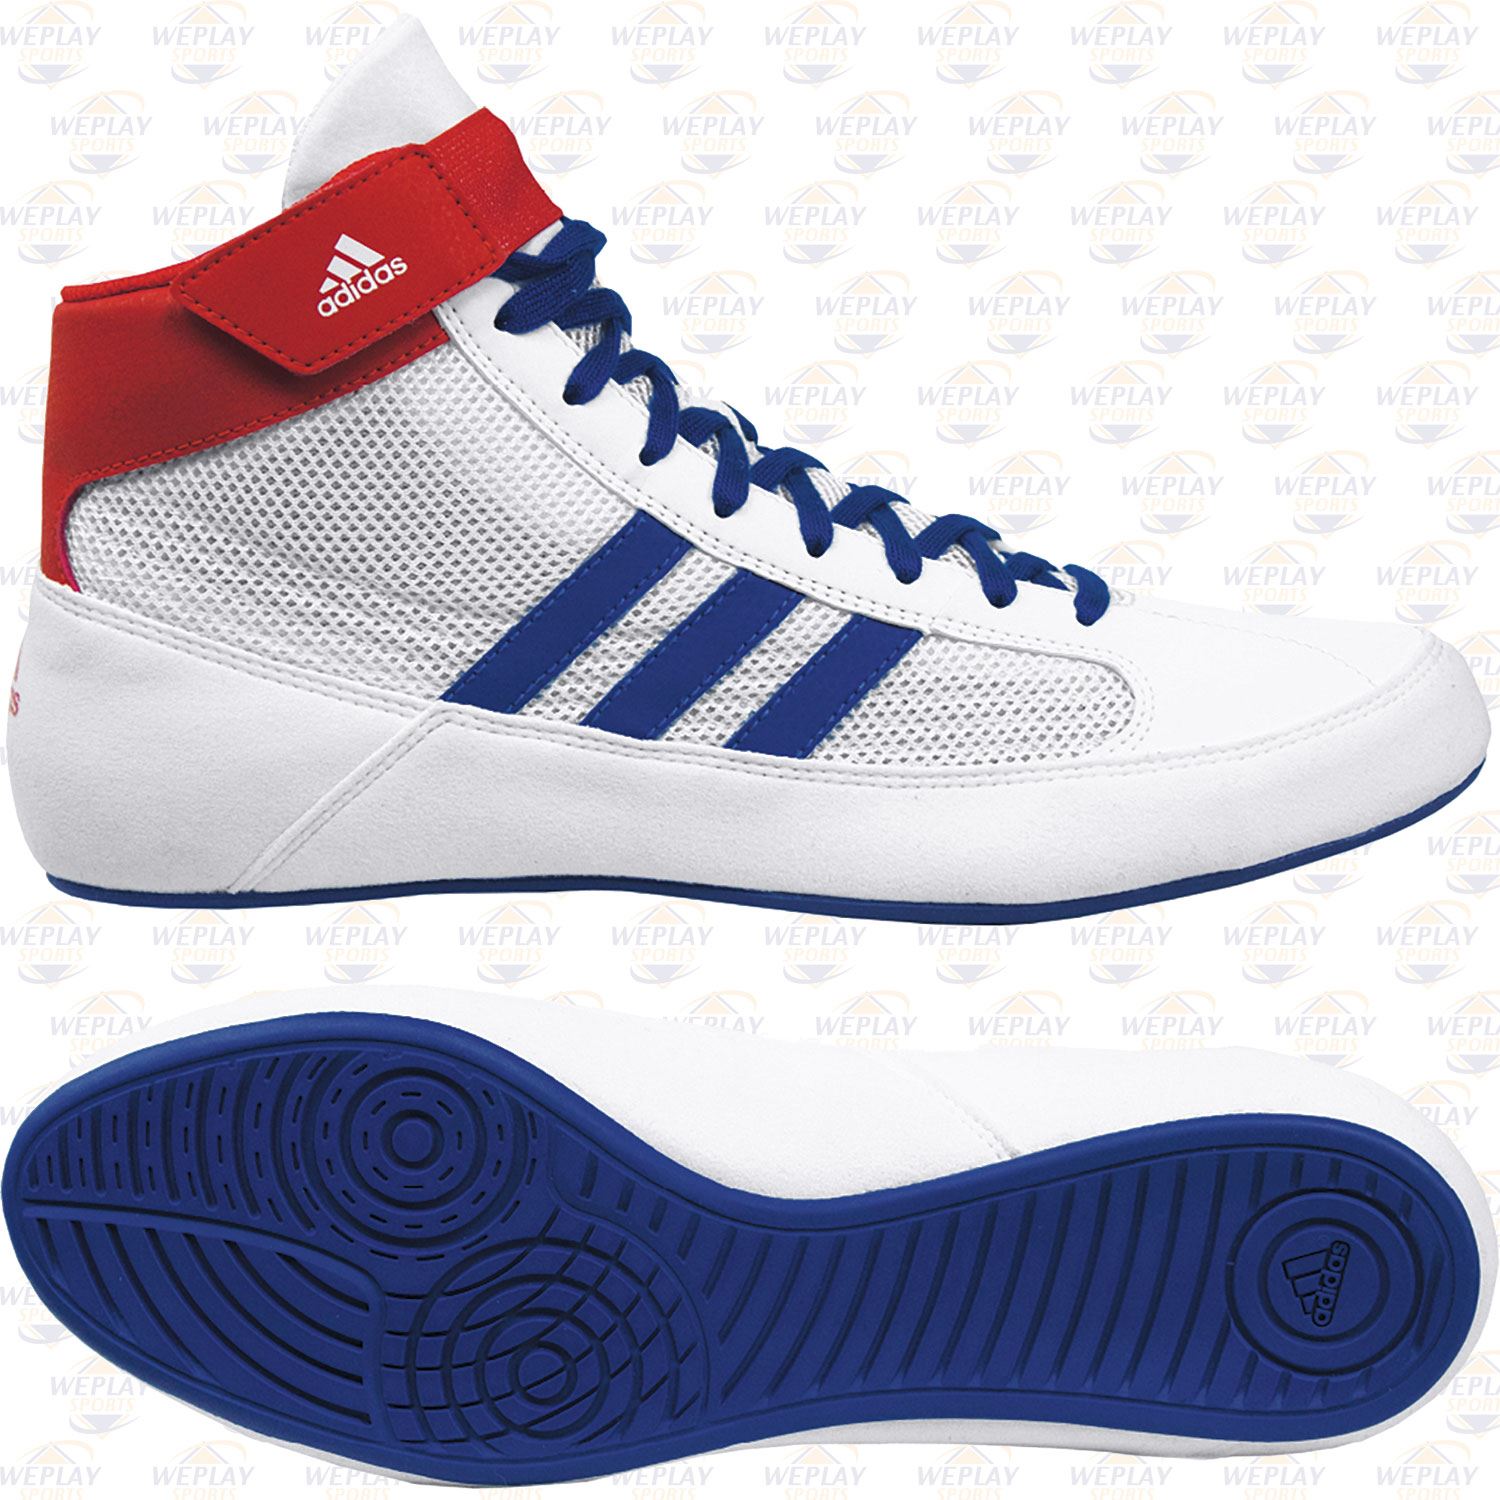 adidas wrestling shoes red white blue